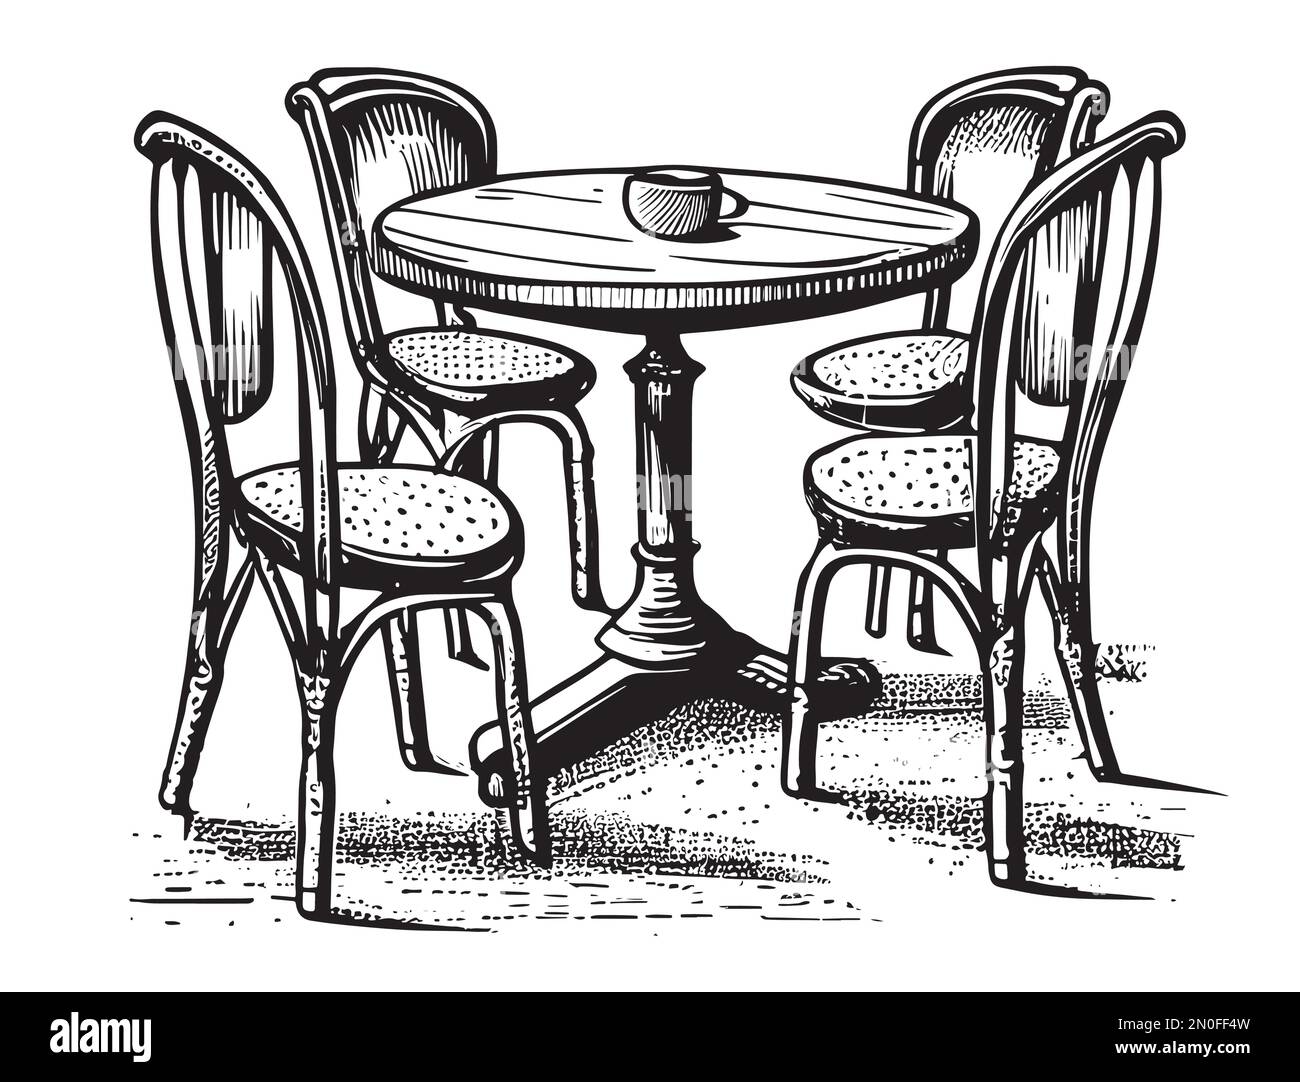 Cafe table with chairs hand drawn sketch in doodle style illustration Stock Vector